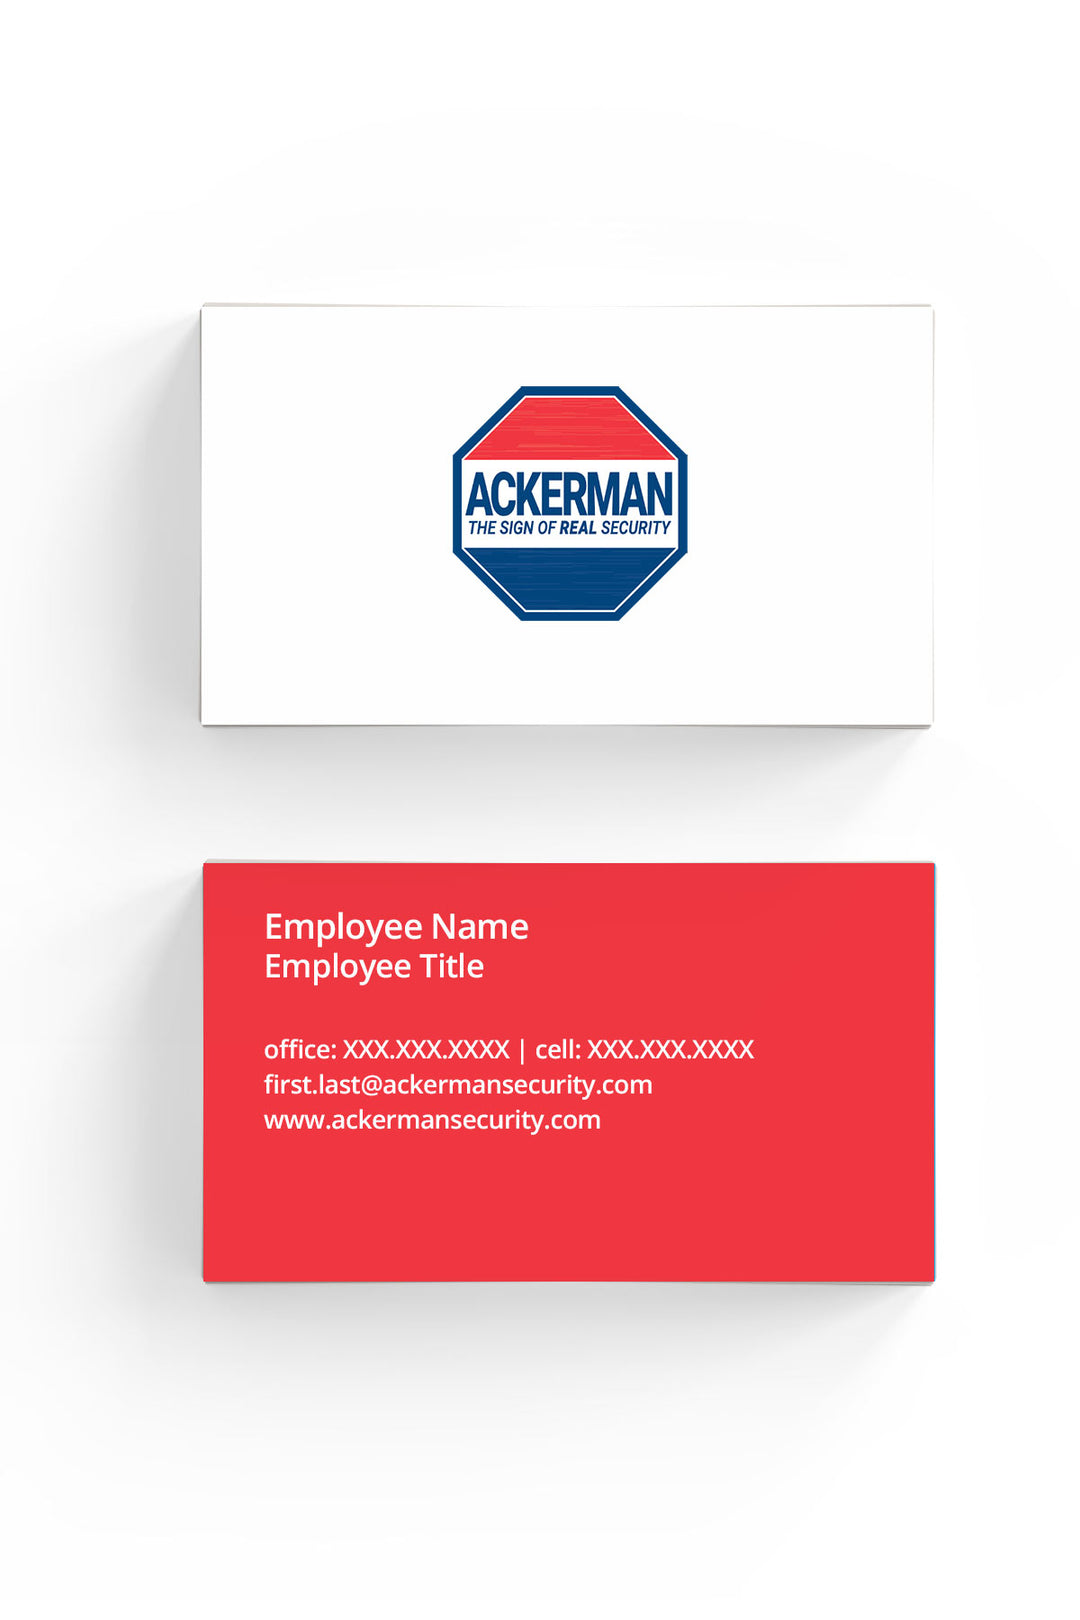 Ackerman Business Cards